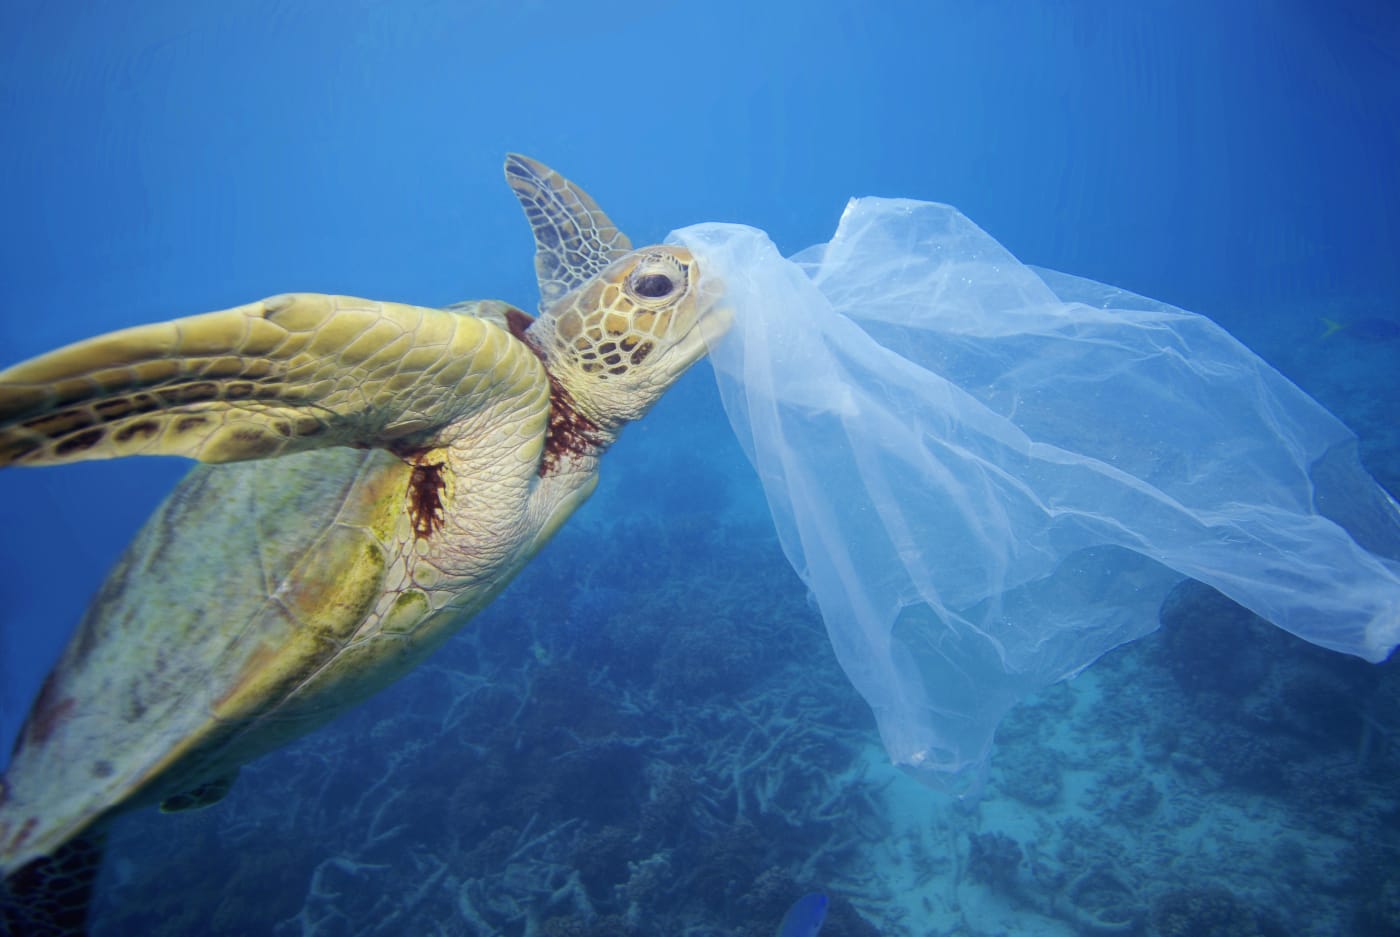 Green sea turtle (Chelonia mydas) with a plastic bag, Moore Reef, Great Barrier Reef, Australia. The bag was removed by the photographer before the turtle had a chance to eat it.